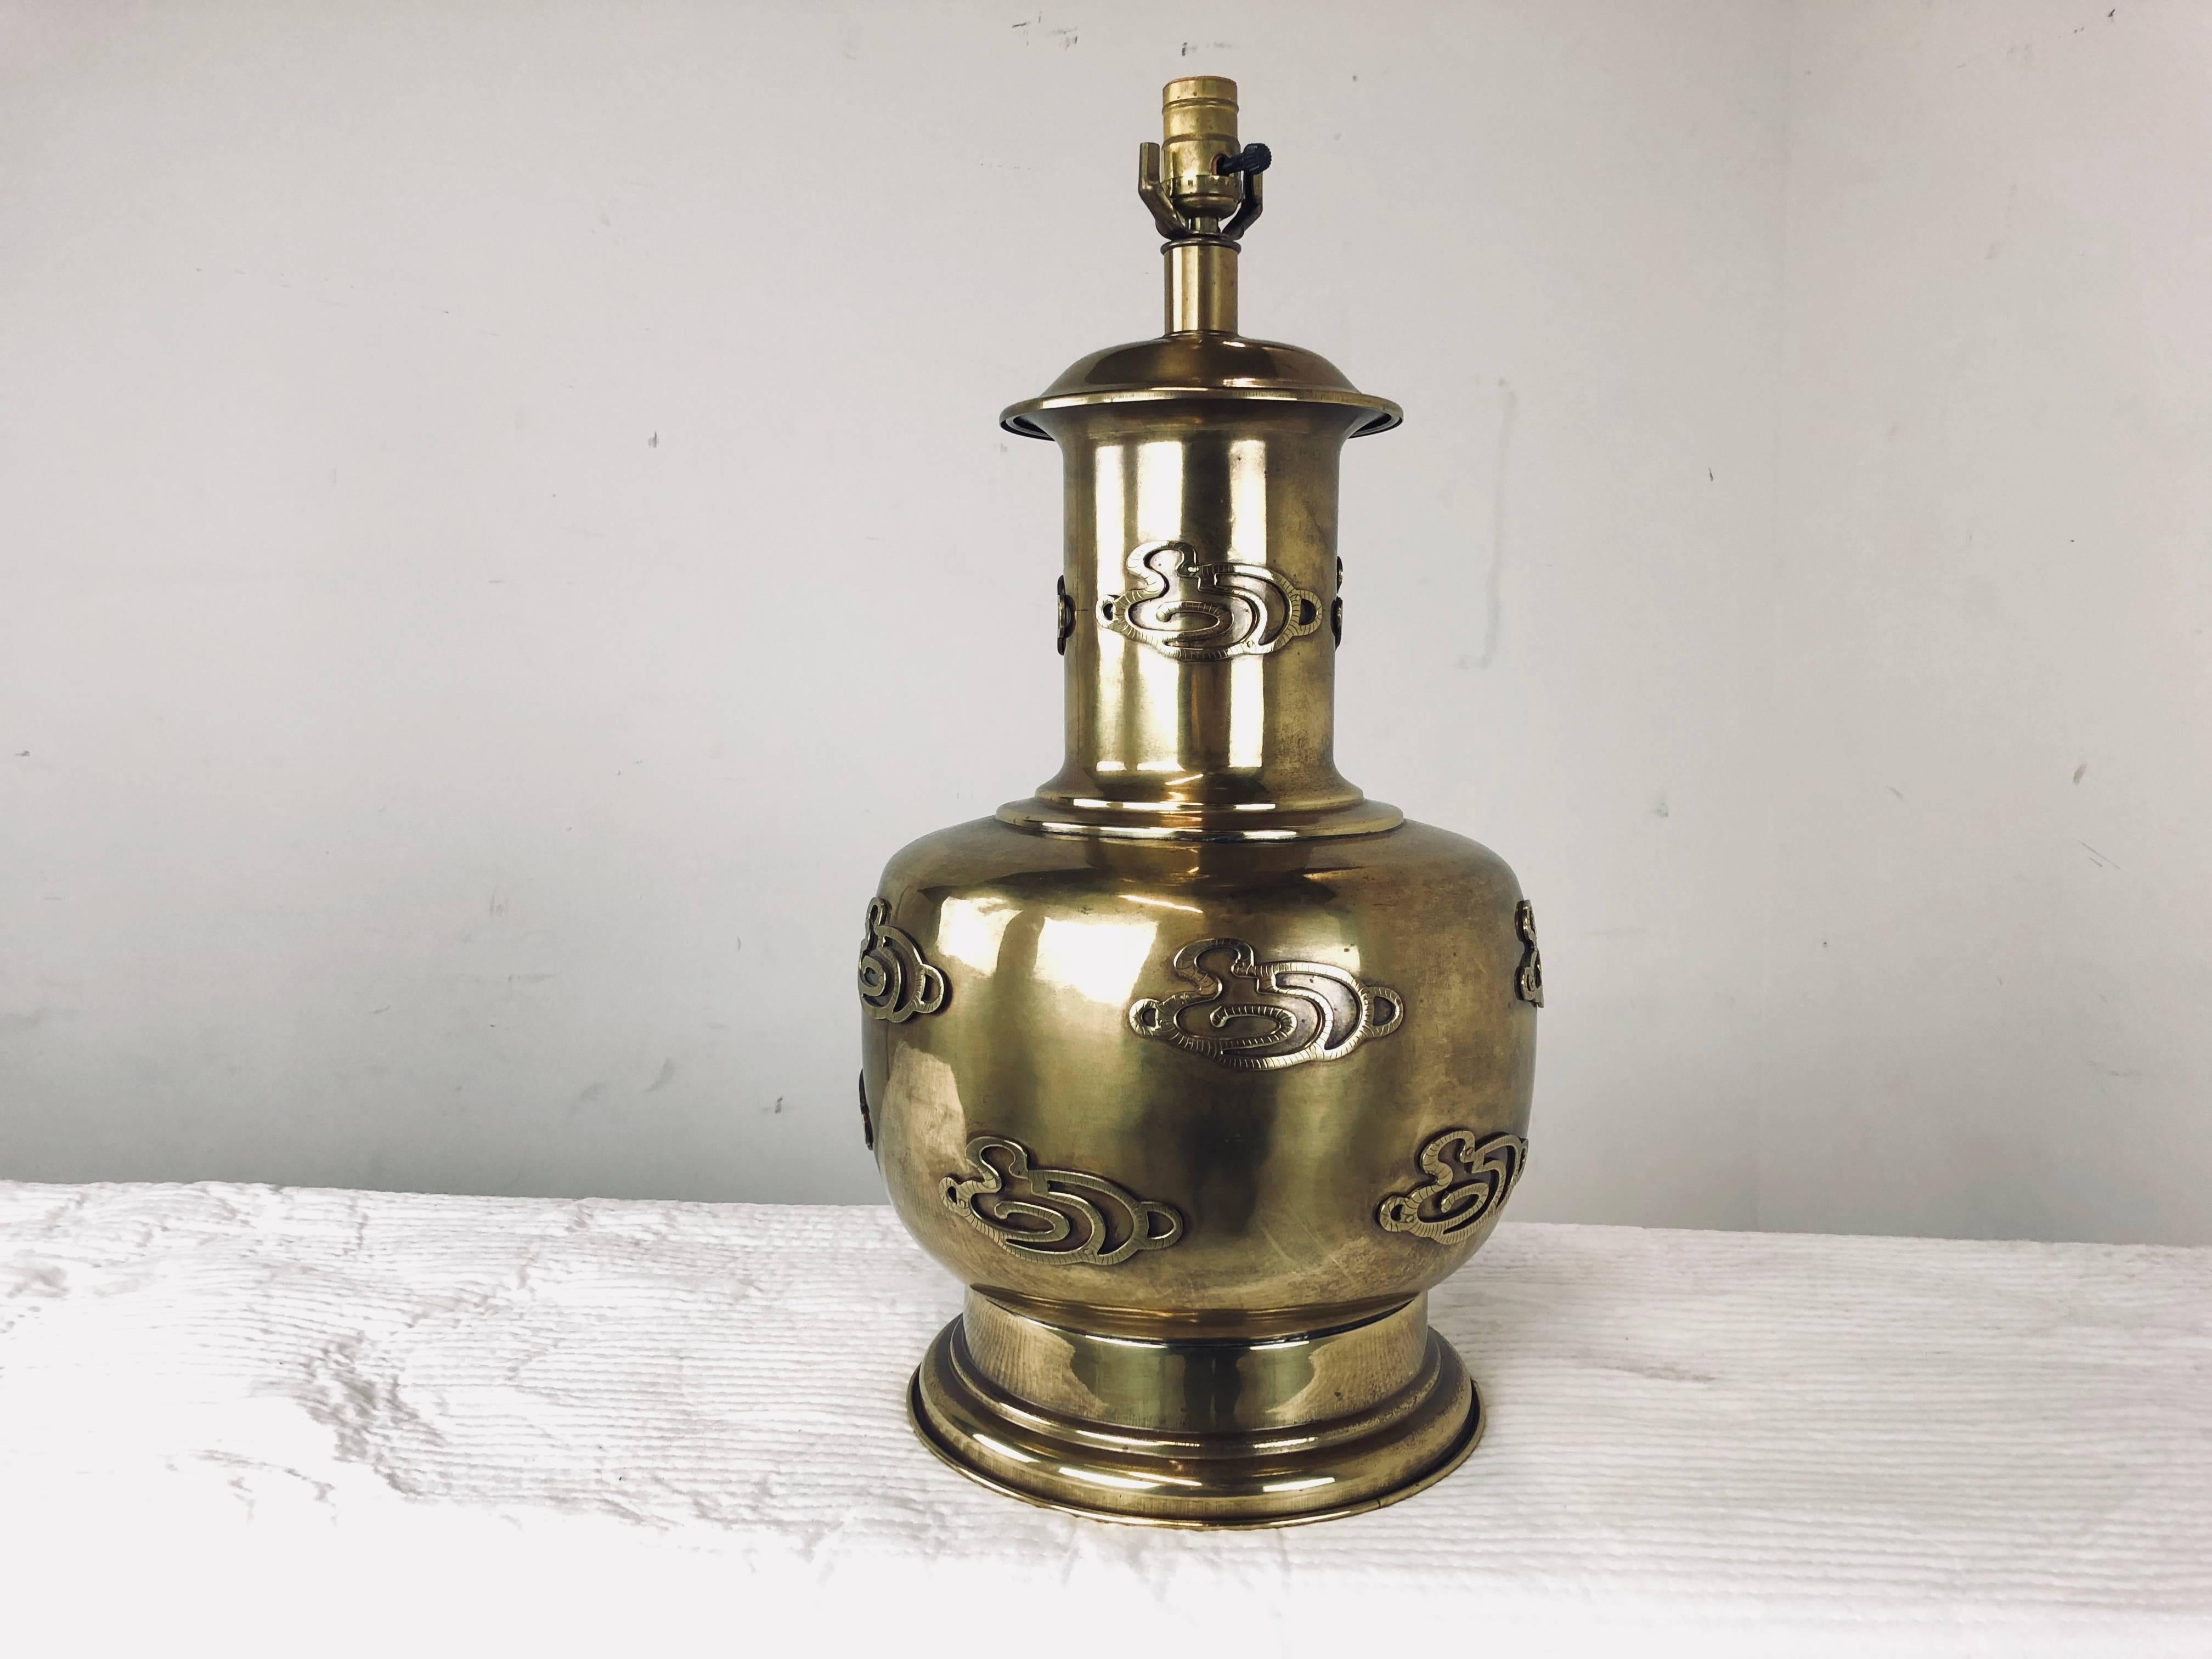 Vintage brass Ming style table lamp. The lamp is in good vintage condition with visible wear due to age and use. Lampshade in not included, circa 1980s

Dimensions: 10